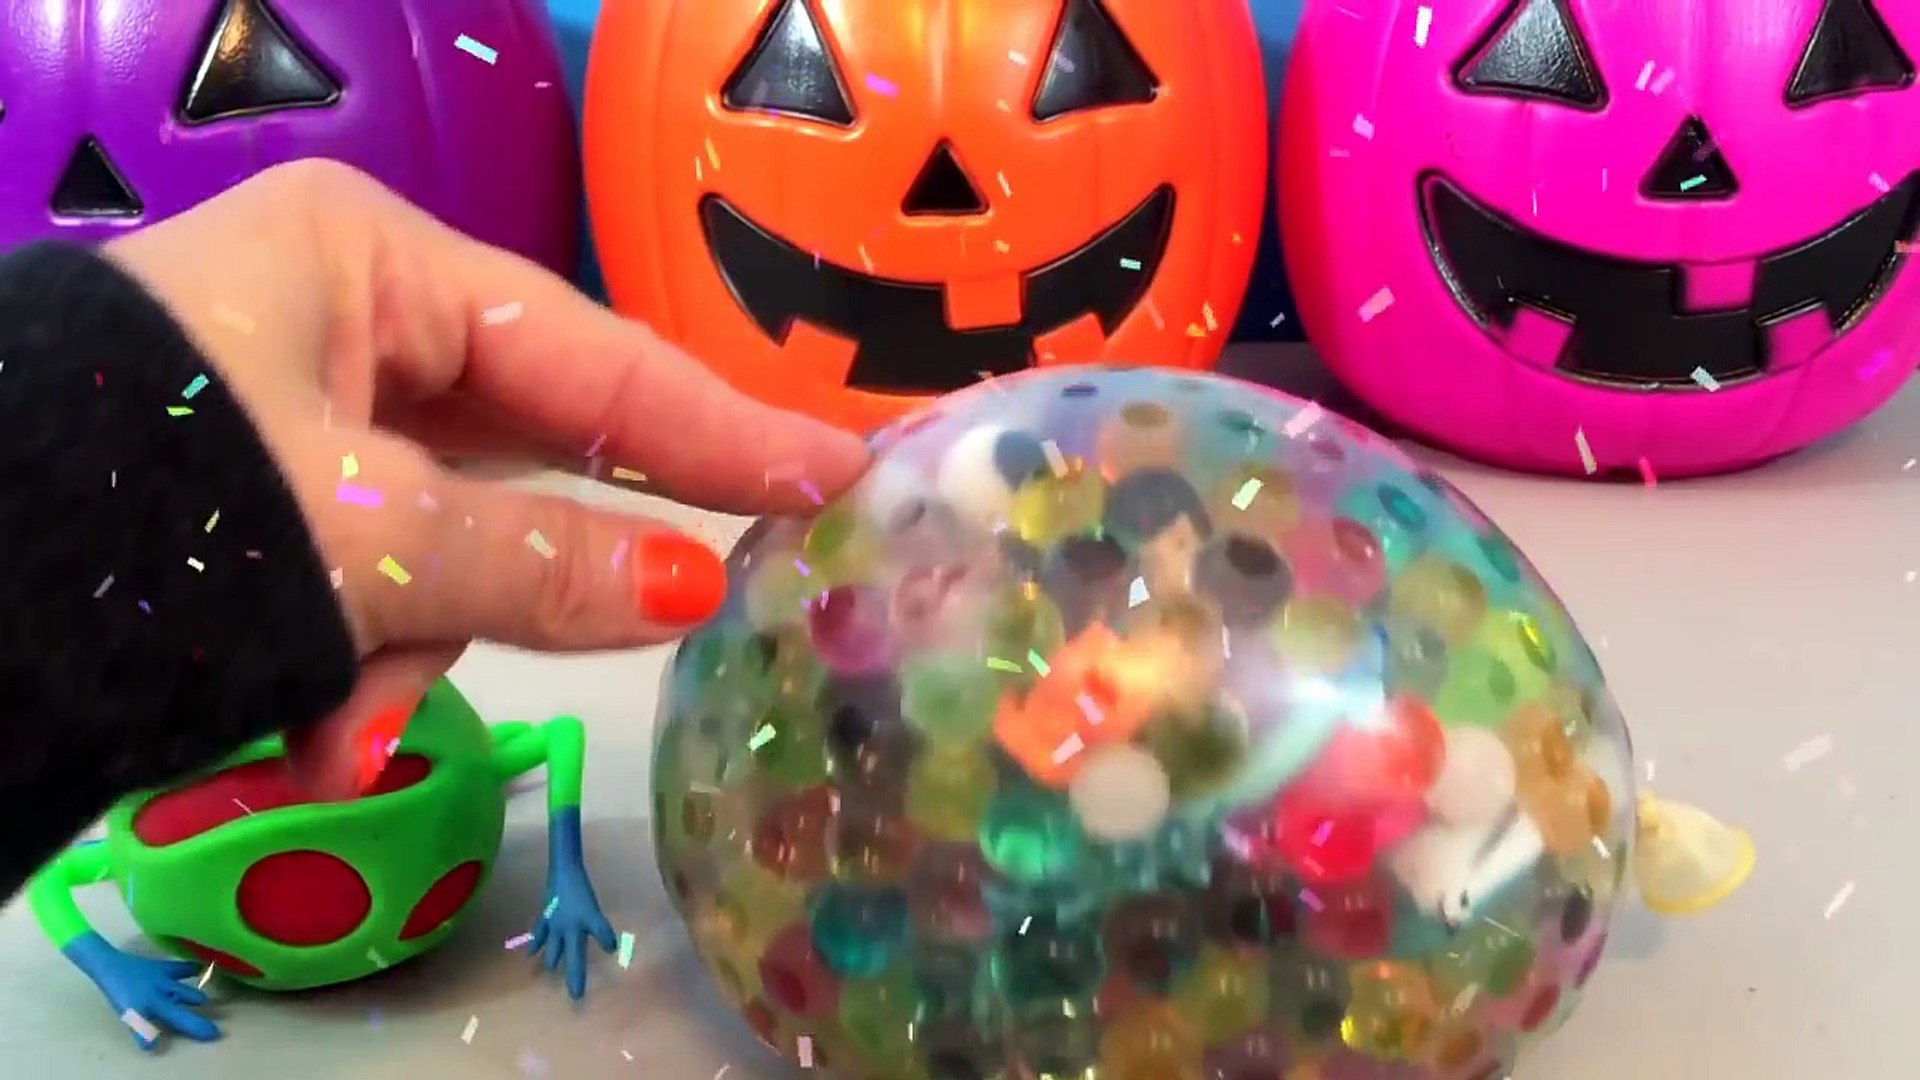 Cutting Open Homemade Squishy Stress Balls GROSS Gooey Squishy SLIME FROG  Mystery Toys Surprises FUN - video Dailymotion